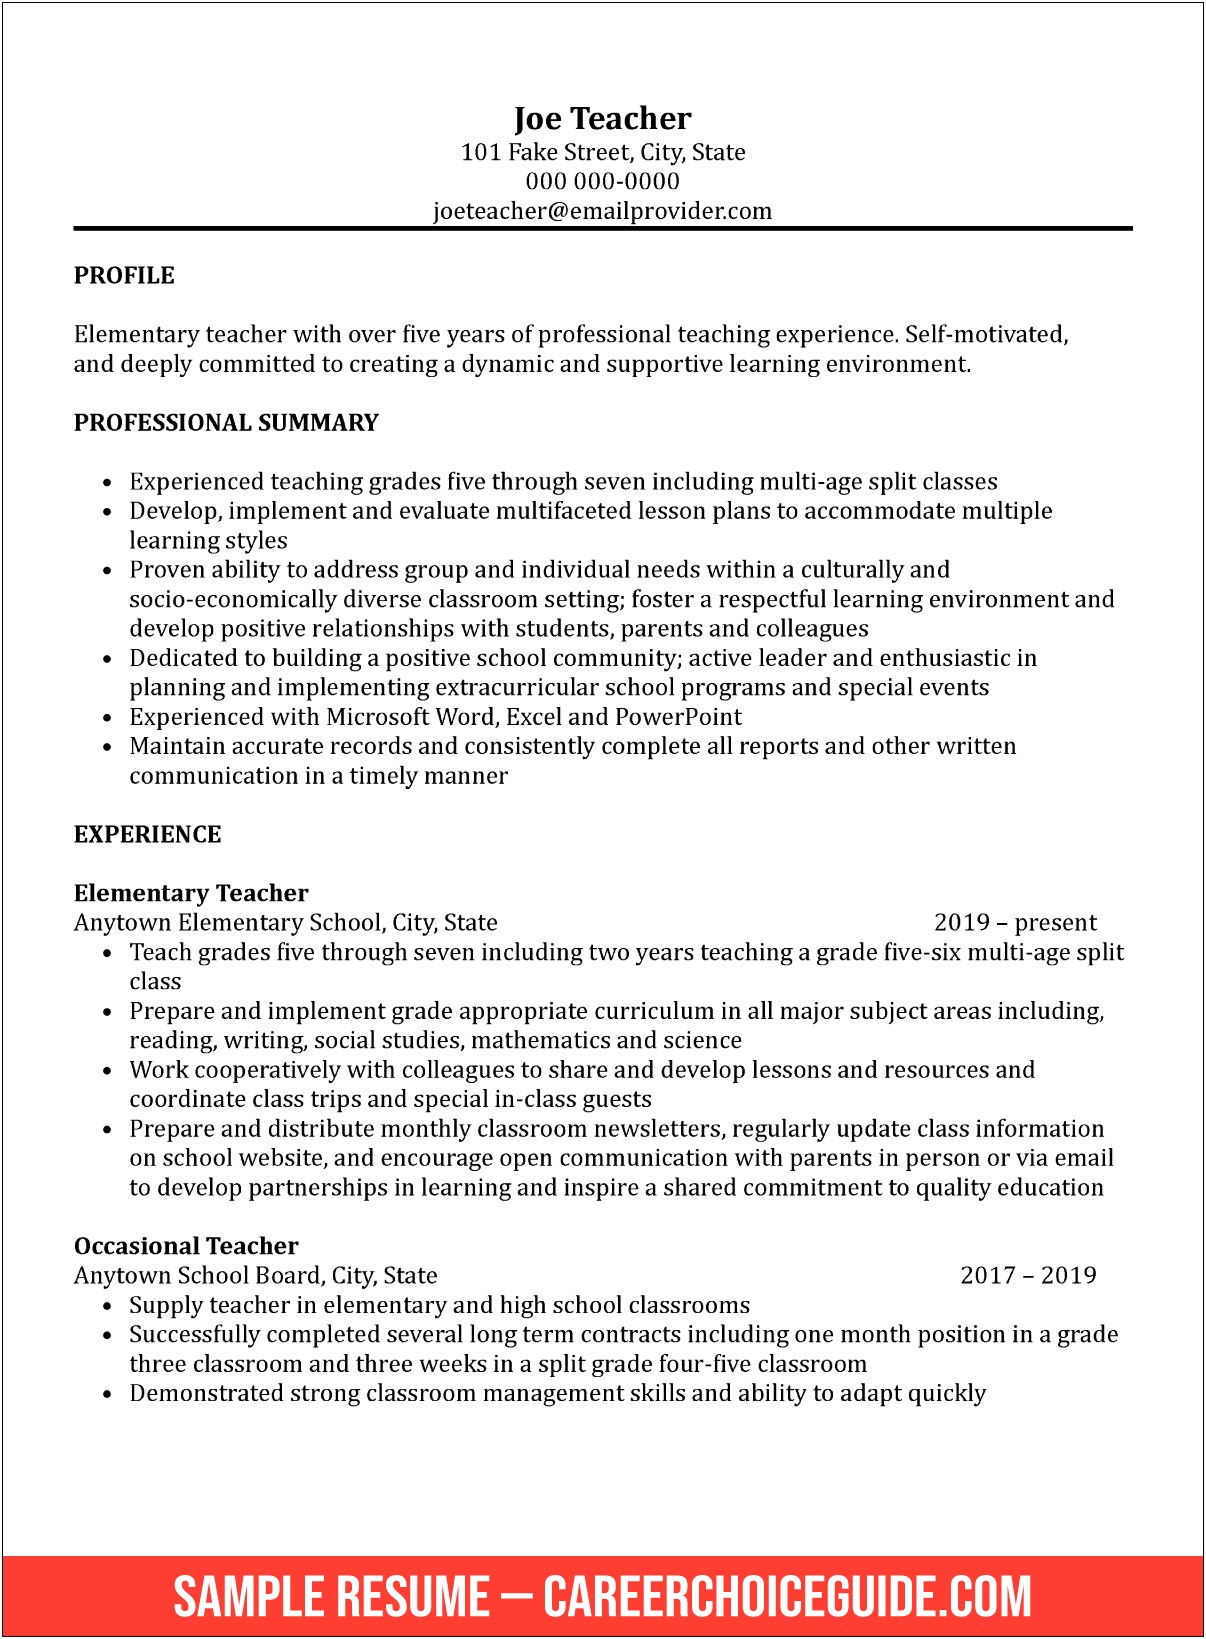 Resume Of A Teacher With Experience